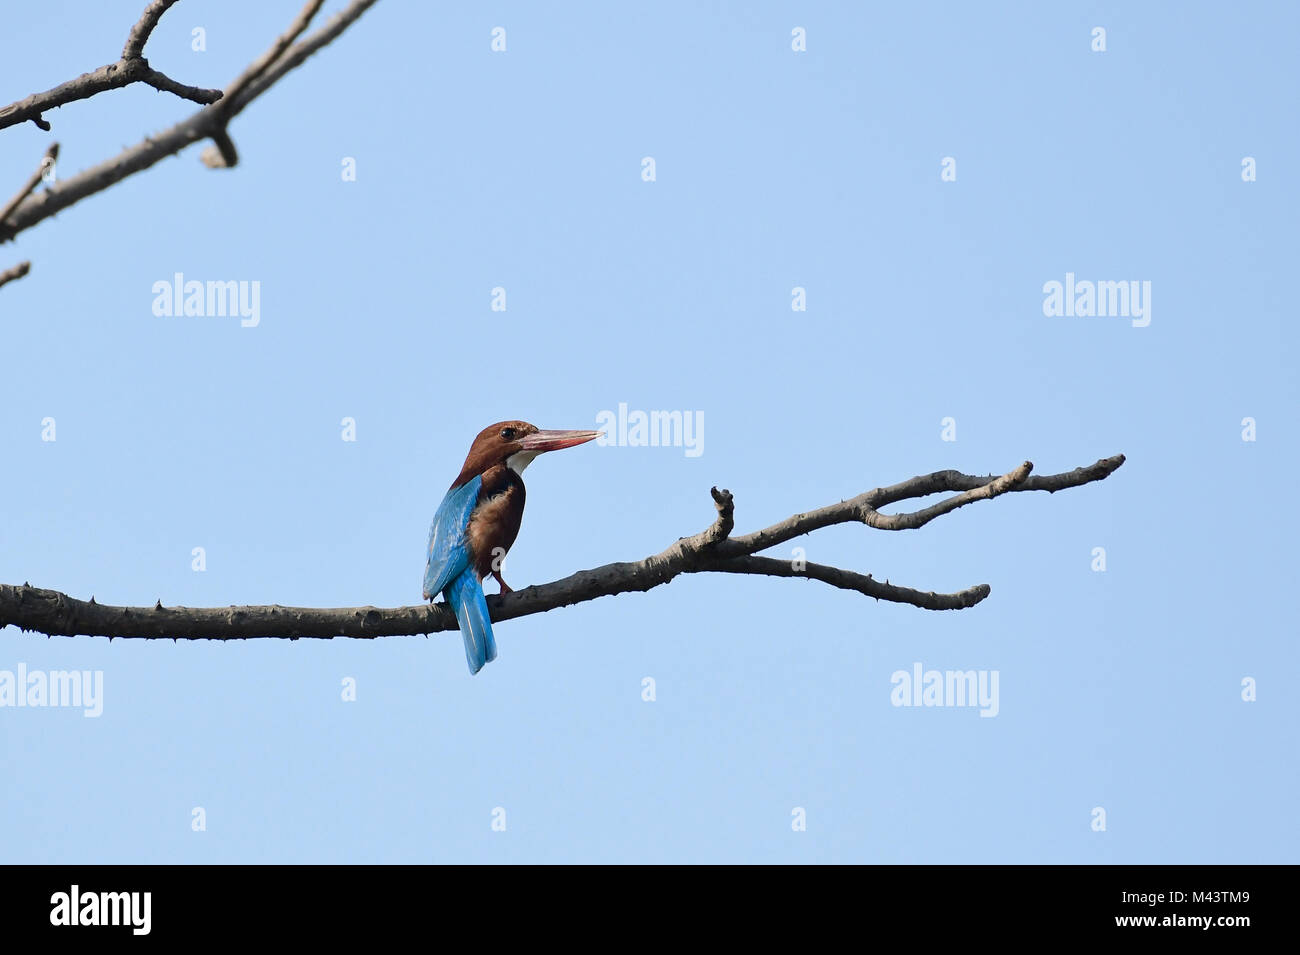 White Breasted Kingfisher Perched on a Branch Stock Photo